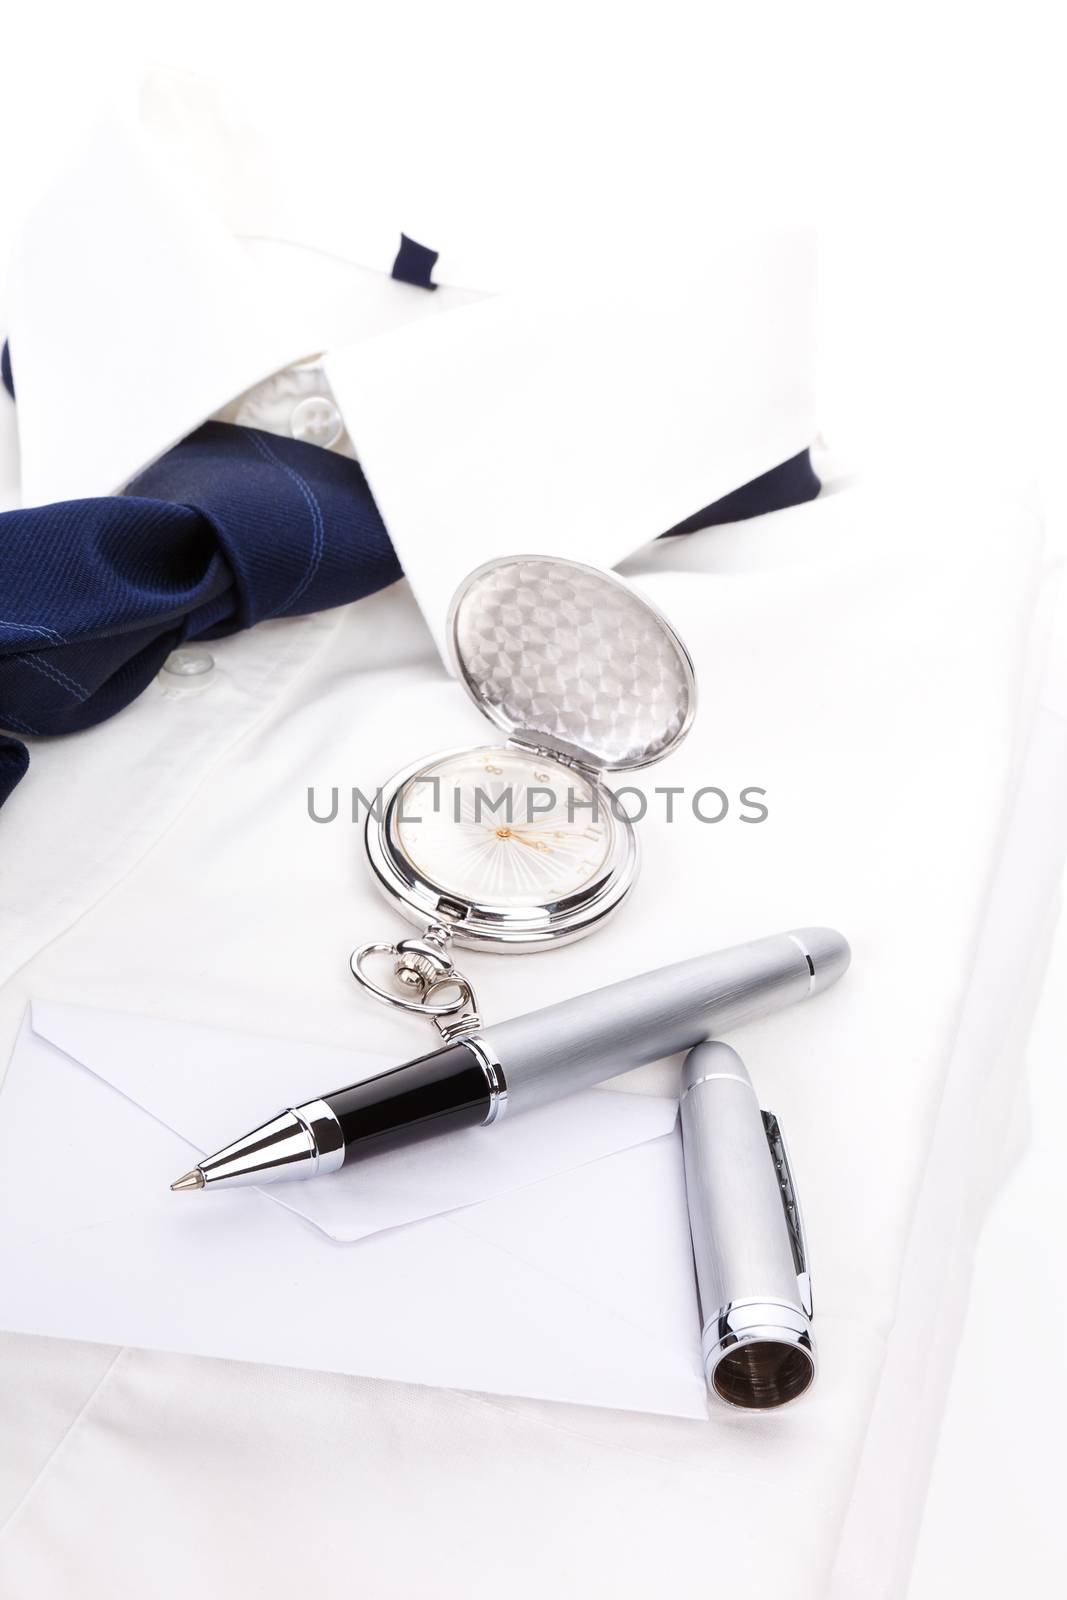 Luxurious business still life with white dress shirt, blue tie, pen, envelope and silver pocket watch. Business concept.